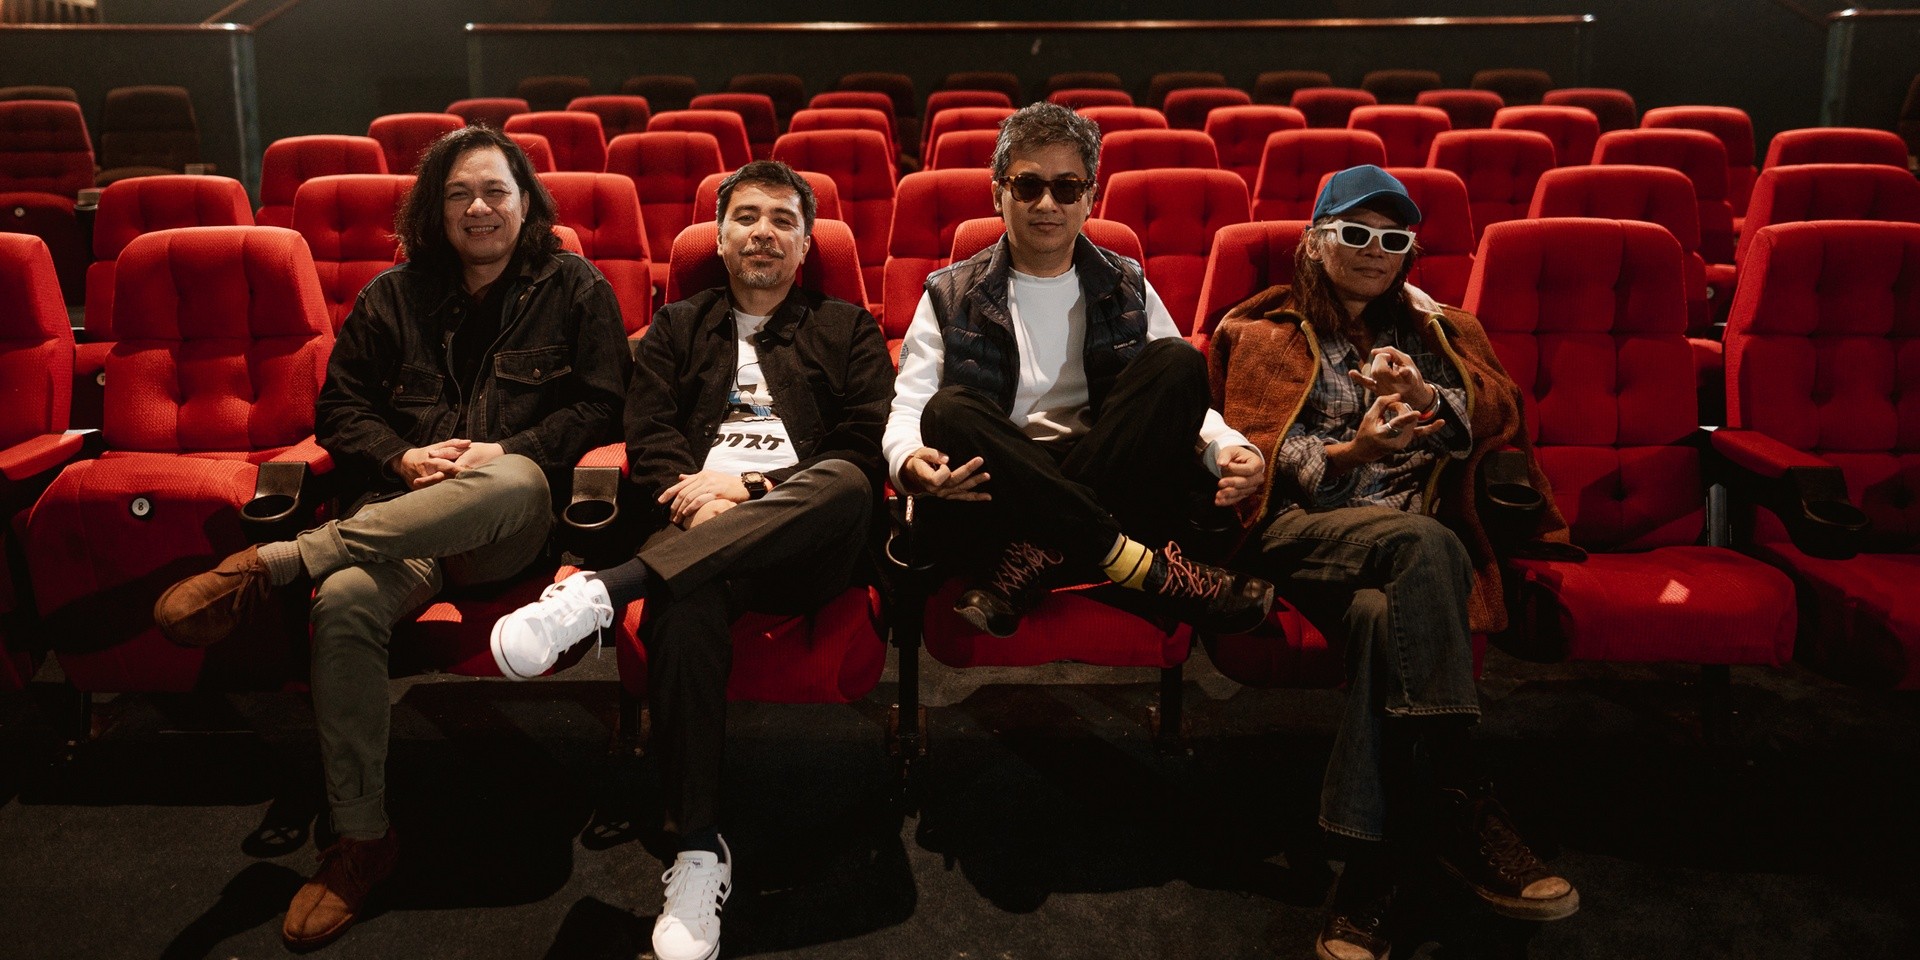 The Eraserheads are coming to Singapore this November